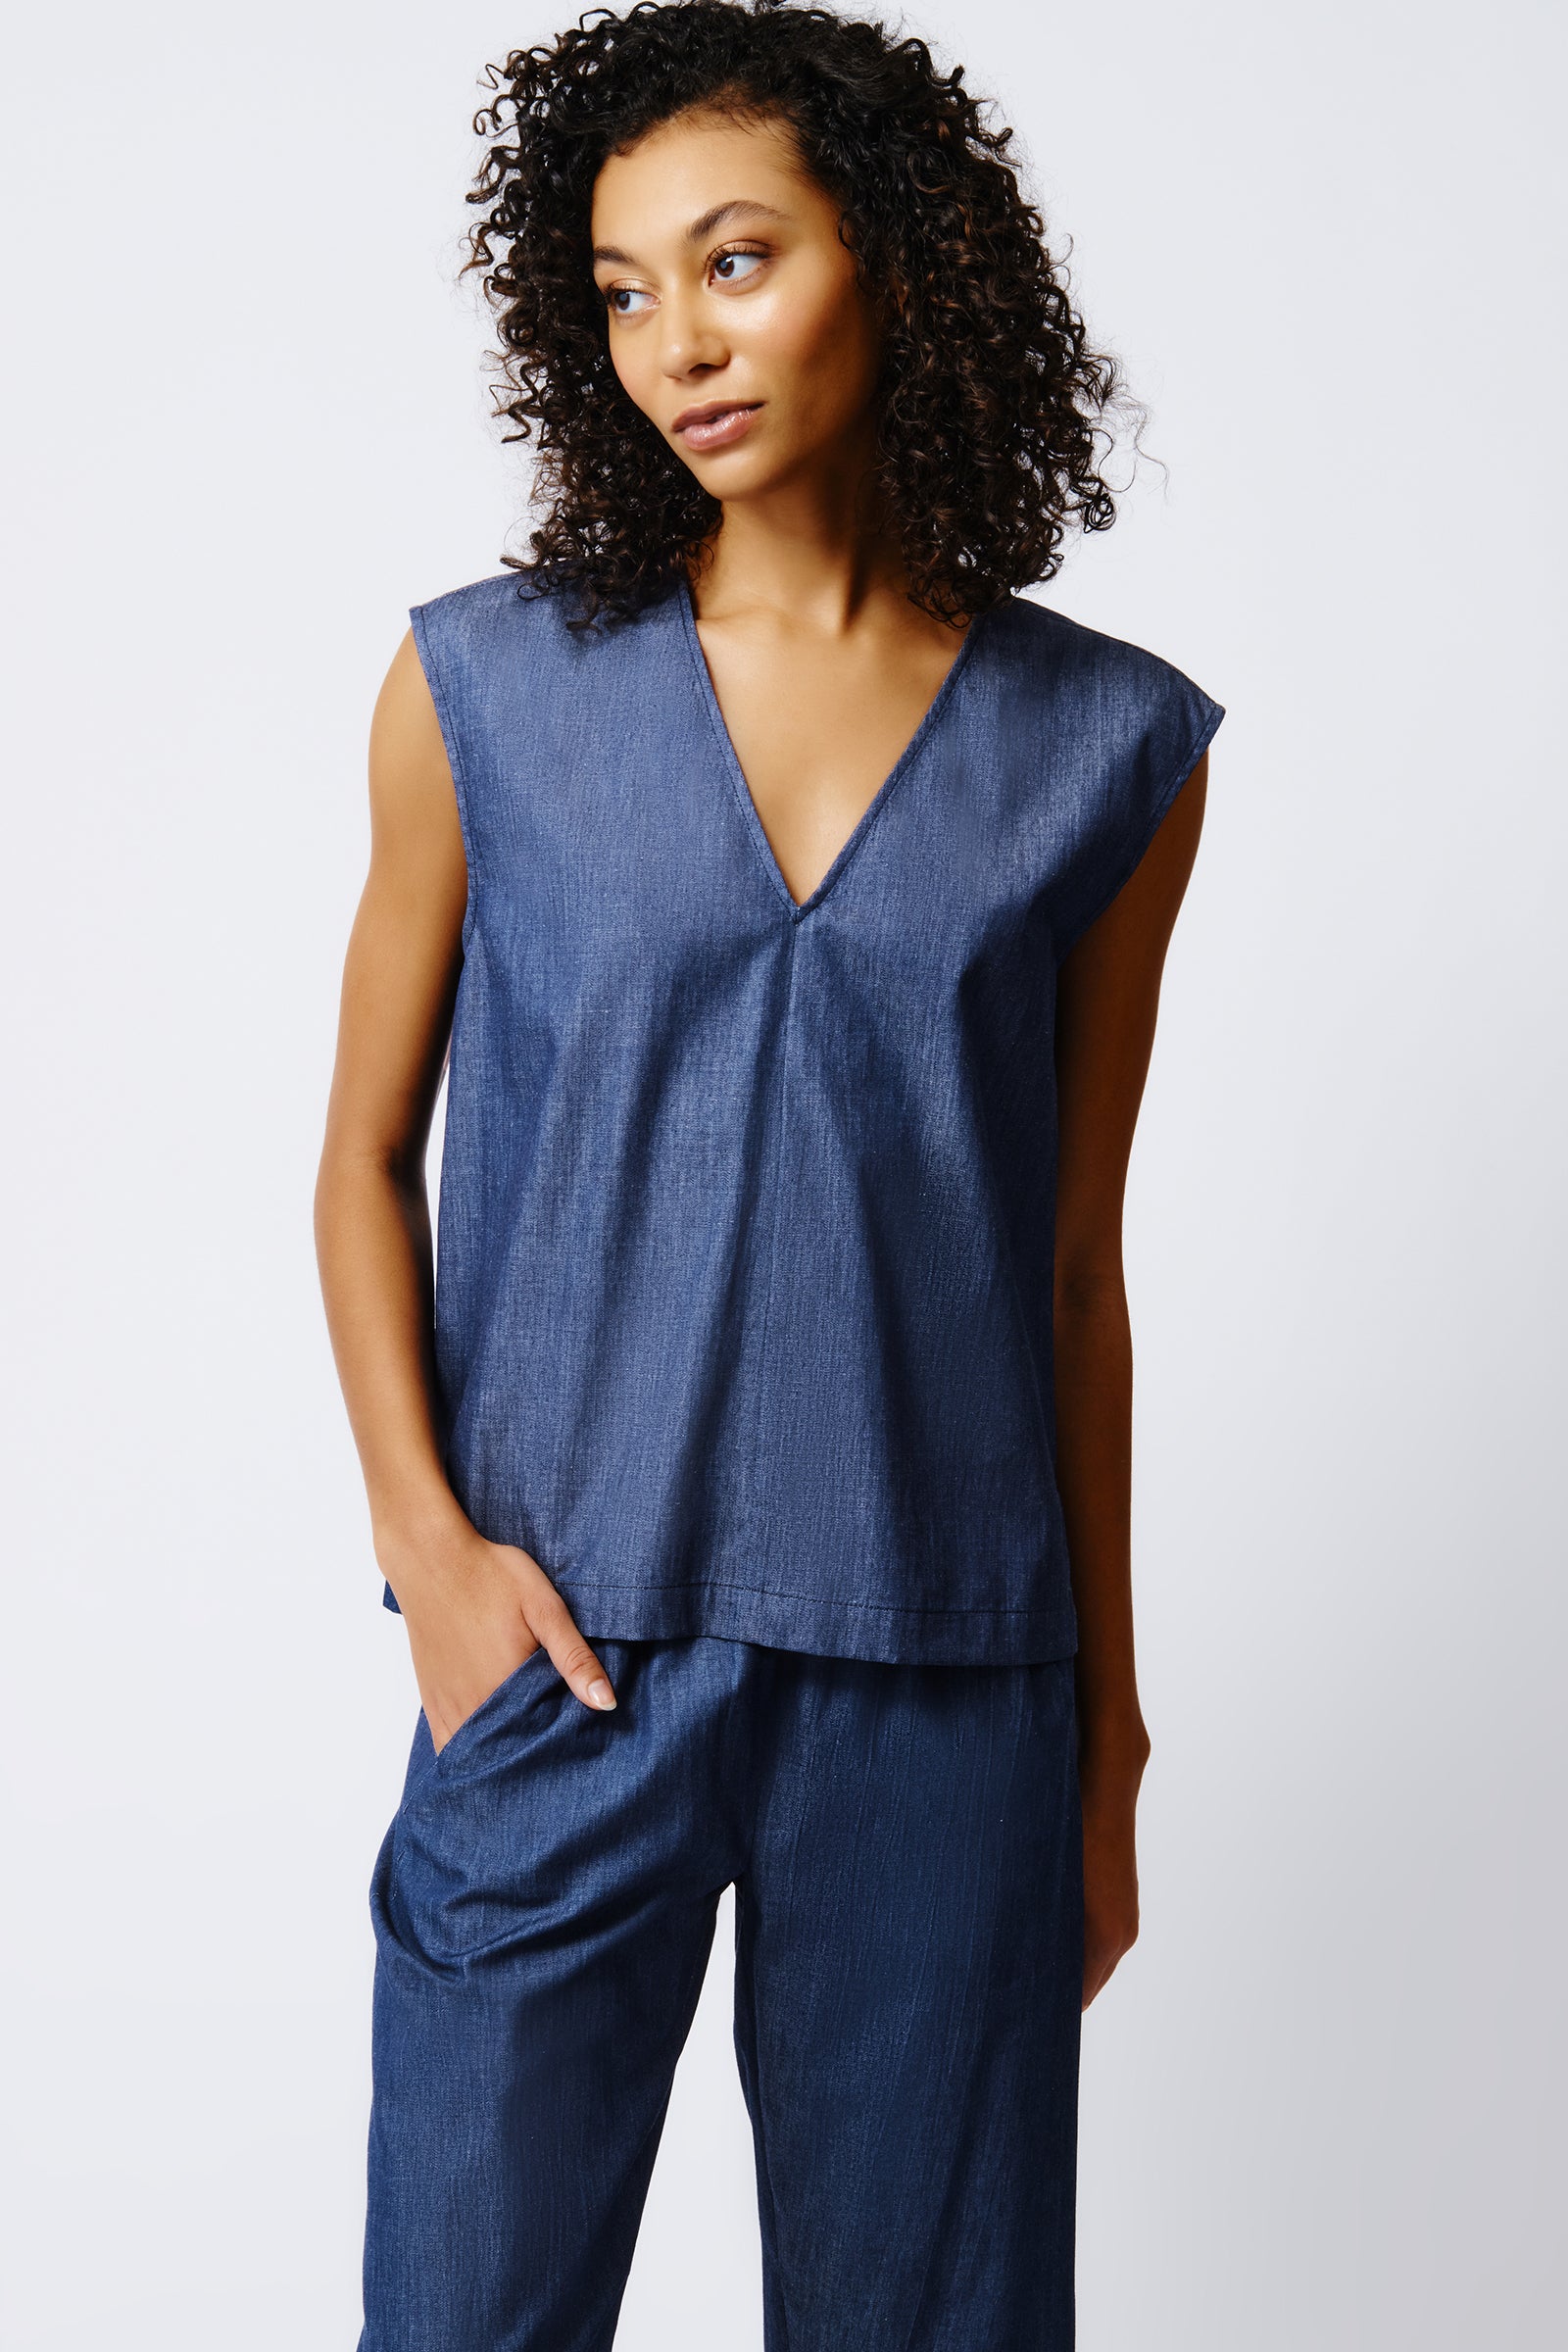 Kal Rieman Ava V Neck Shell in Classic Indigo on Model Front View Crop 2